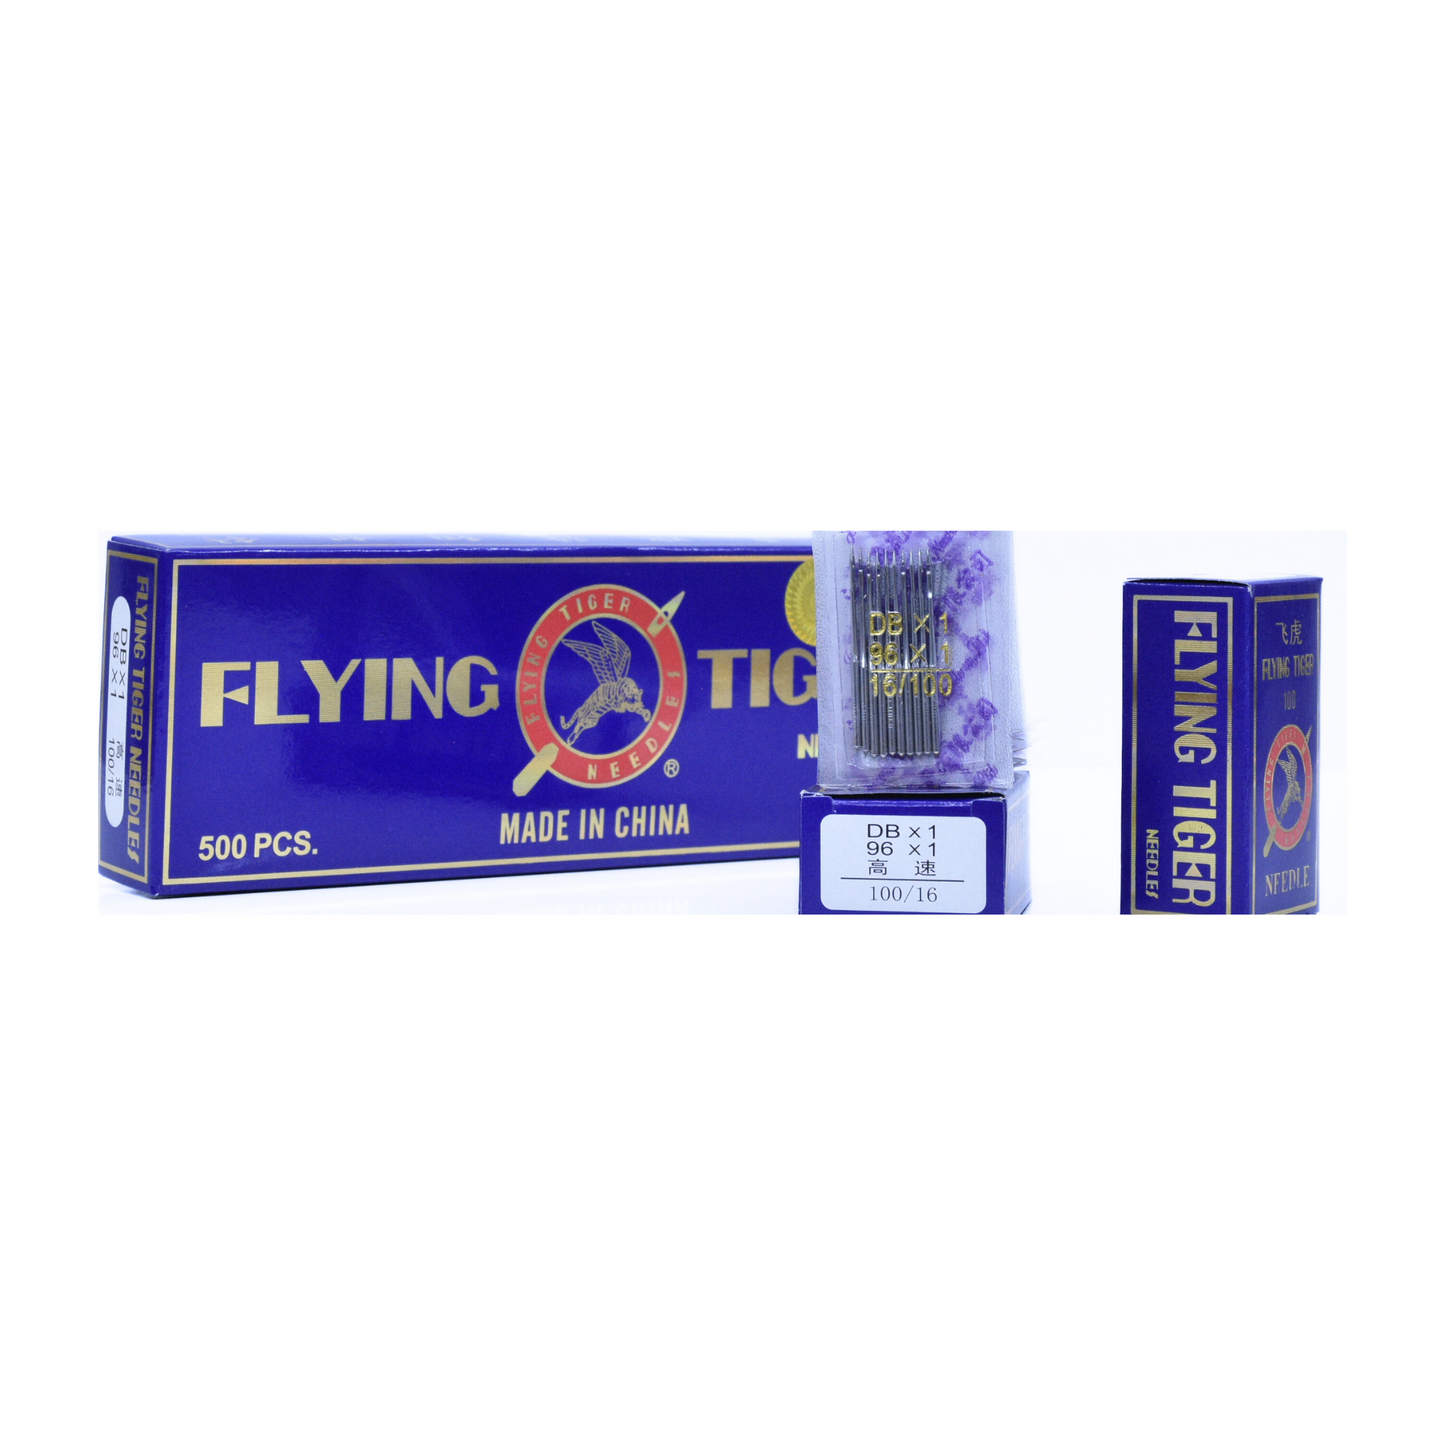 Flying tiger sewing needles